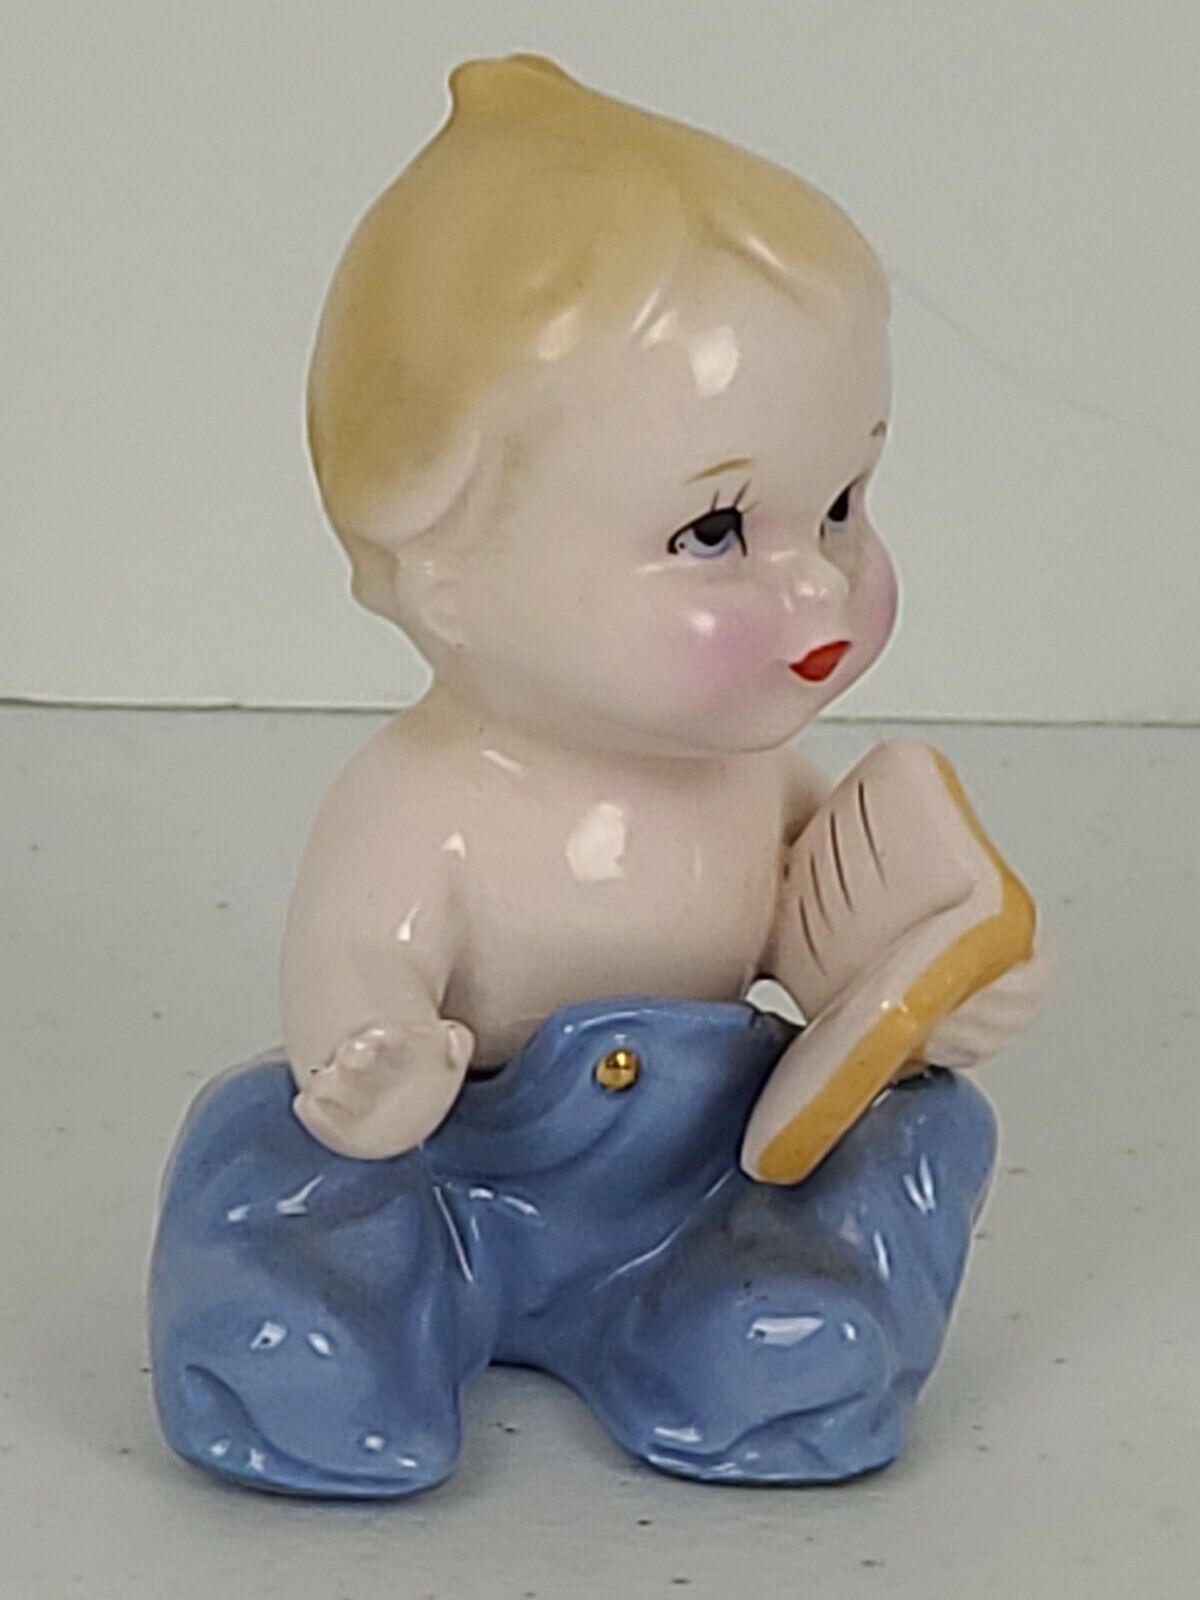 Capodimonte Vtg Hand Painted Porcelain Sitting Baby Toddler w/ Book 3.25